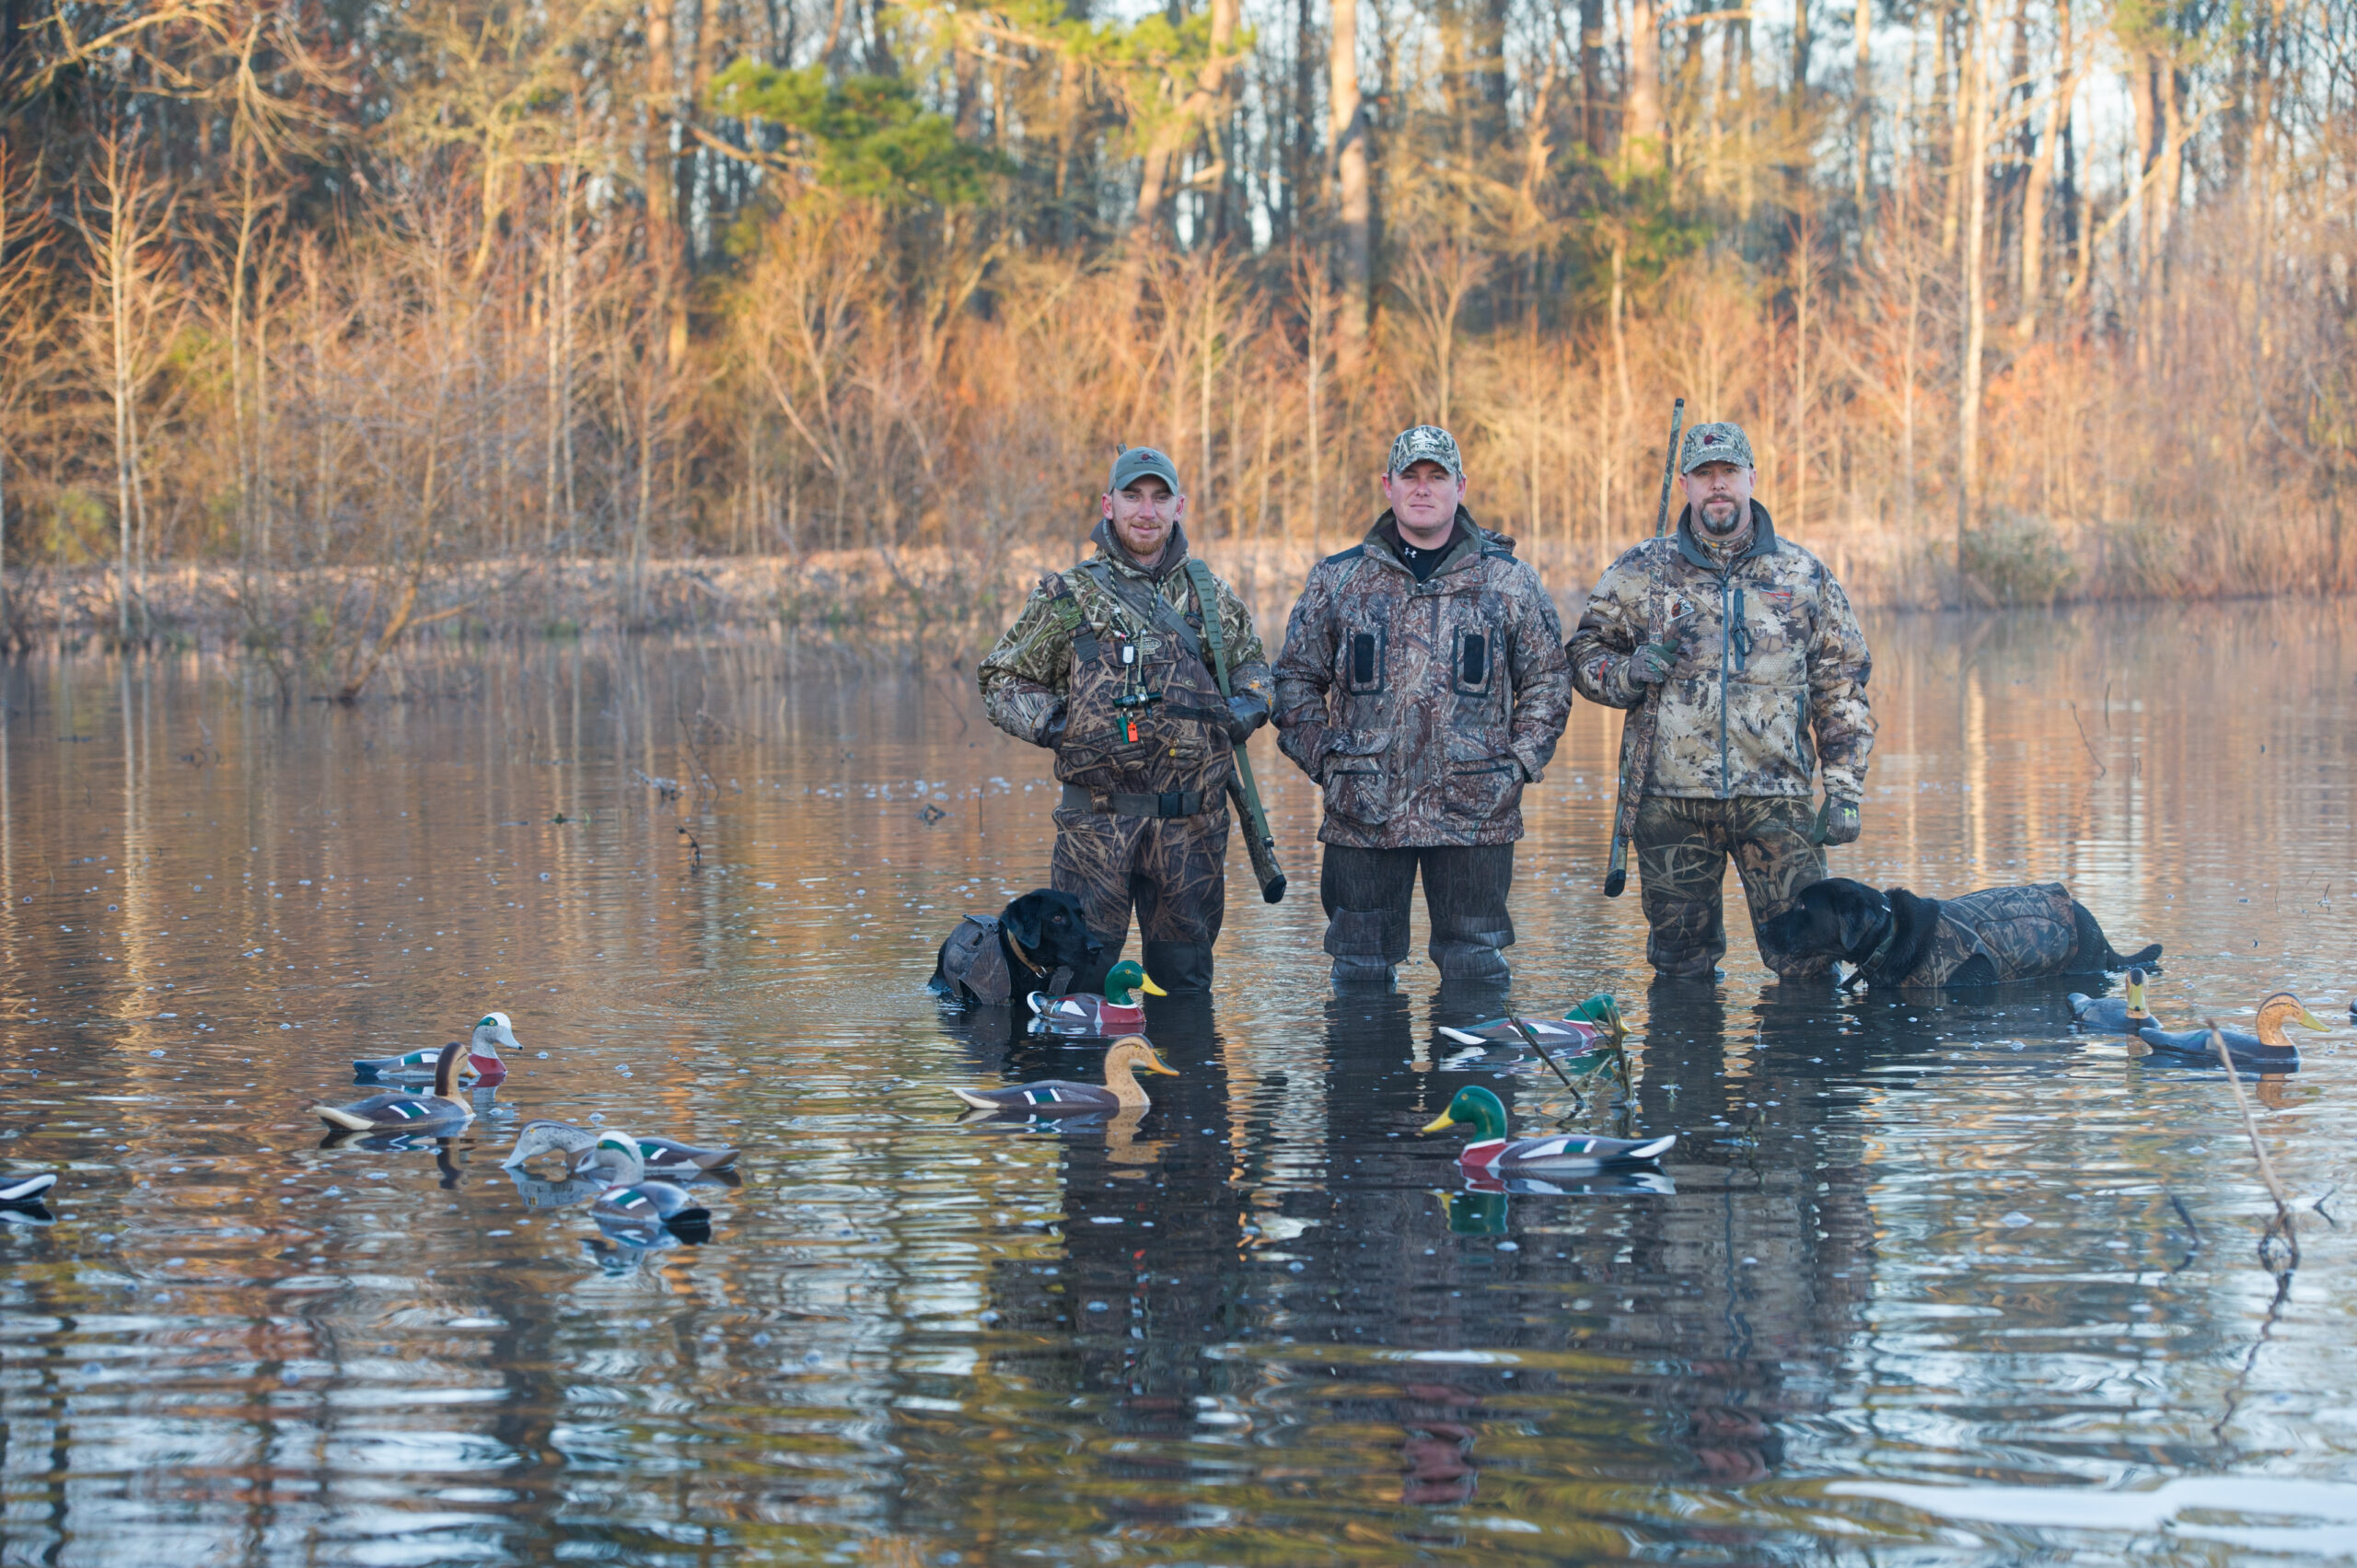 A group of duck hunters with decoys in a knee-deep water in North Carolina.